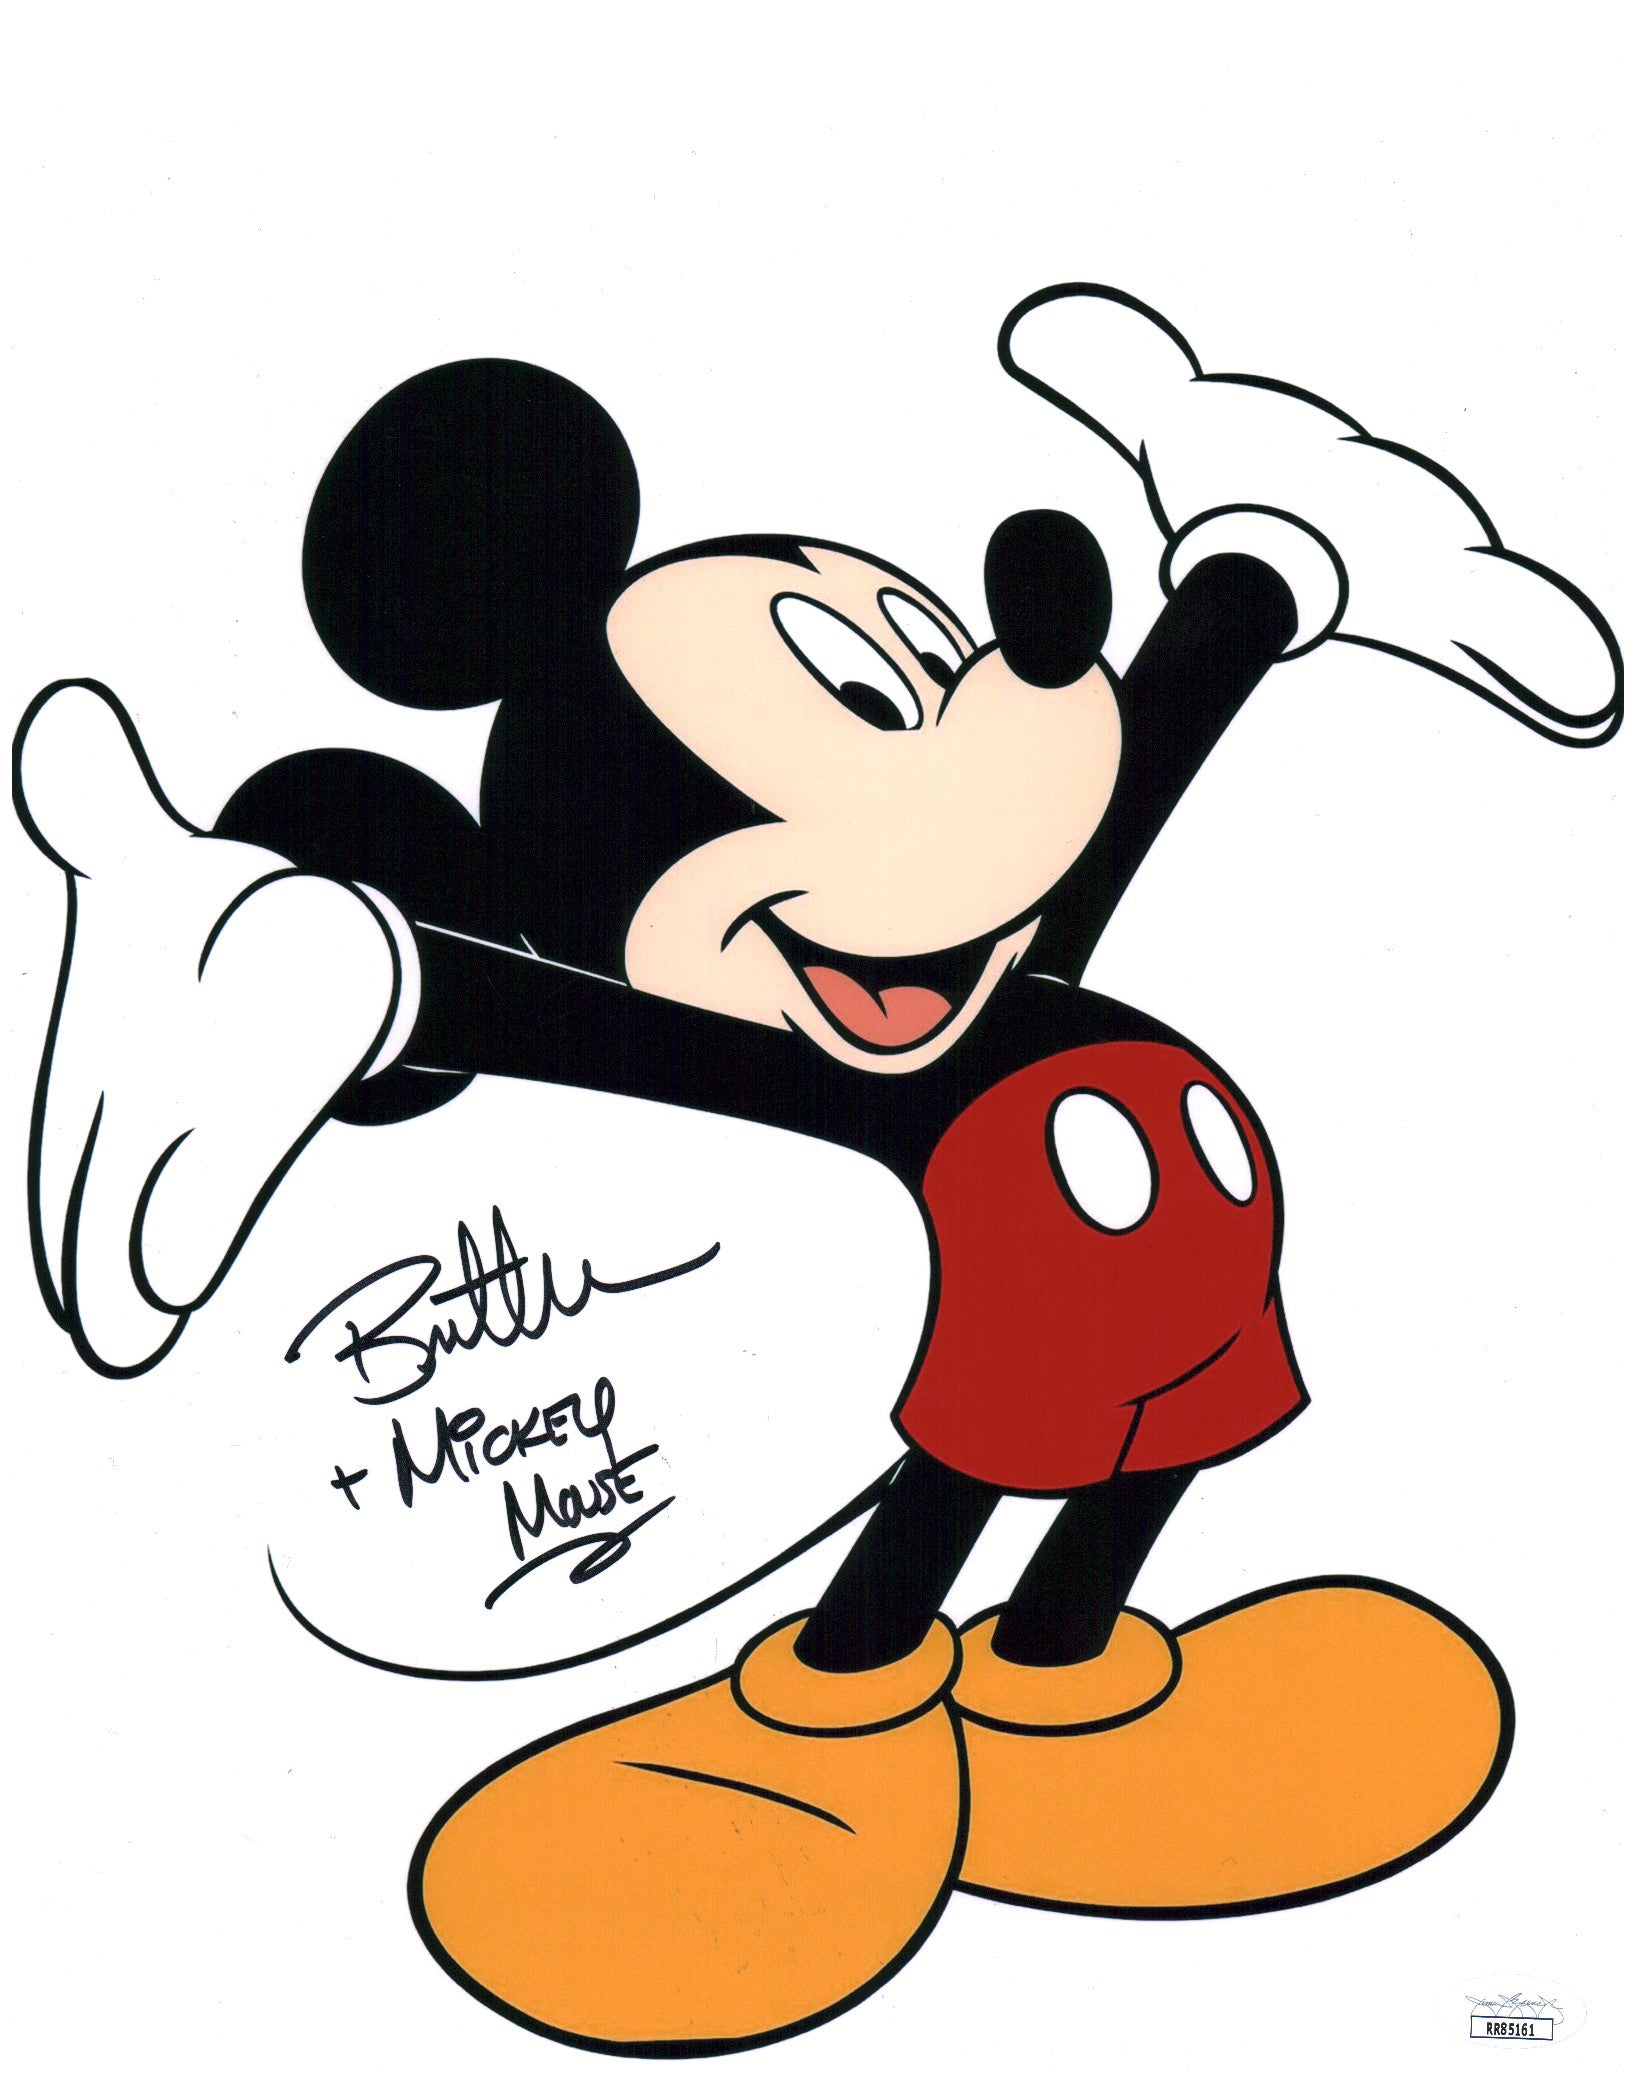 Bret Iwan Disney Mickey Mouse 11x14 Signed Photo Poster JSA COA Certified Autograph